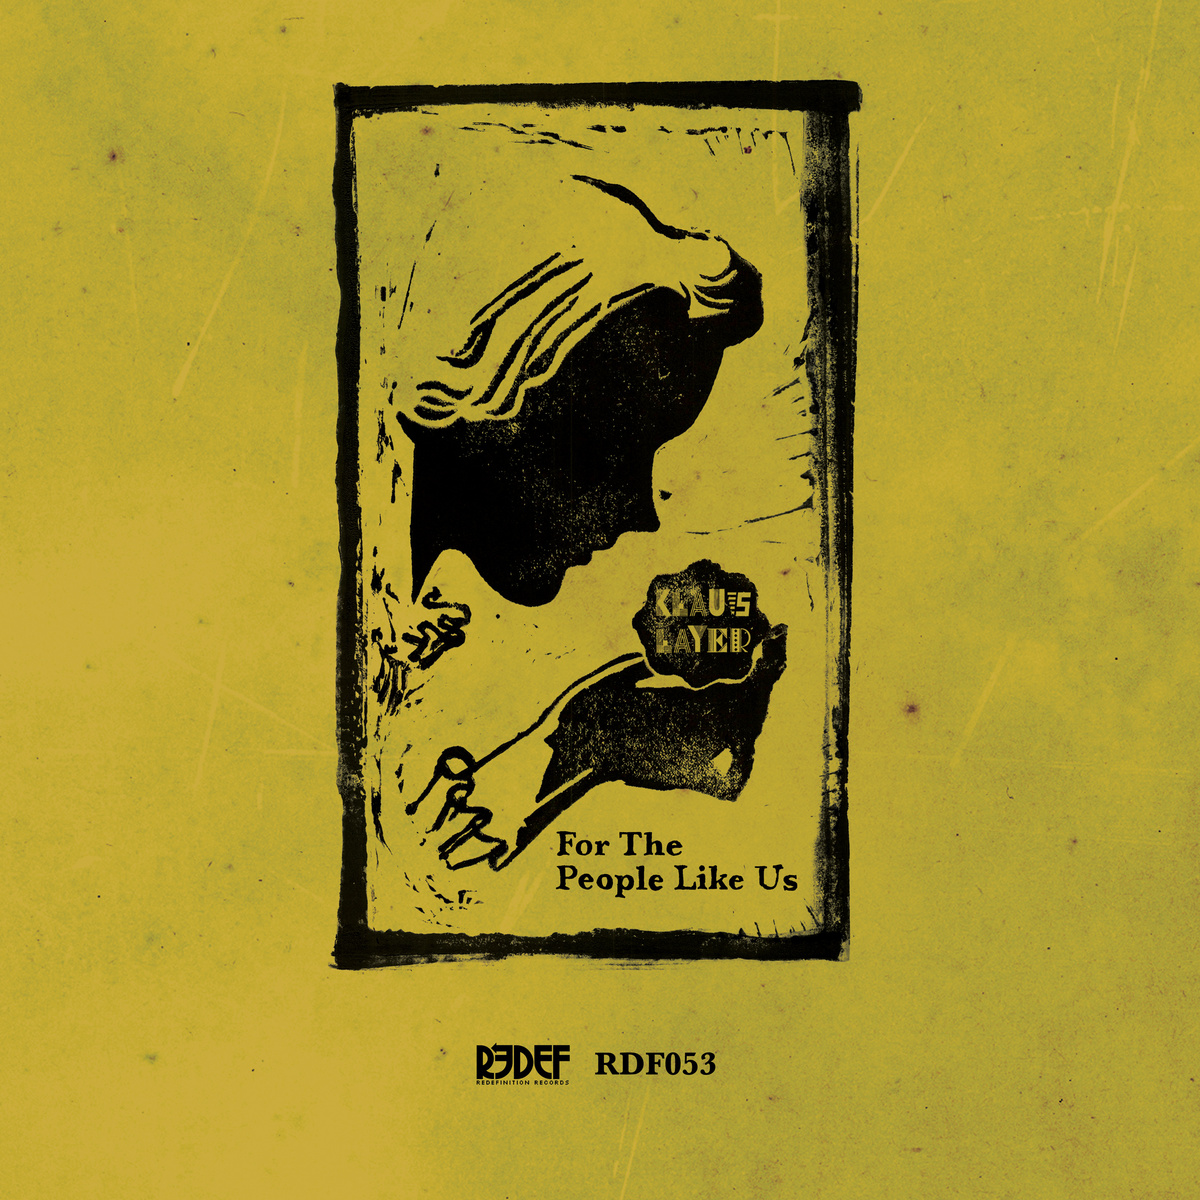 Klaus Layer "For The People Like Us" Release | @REDEFrecords 